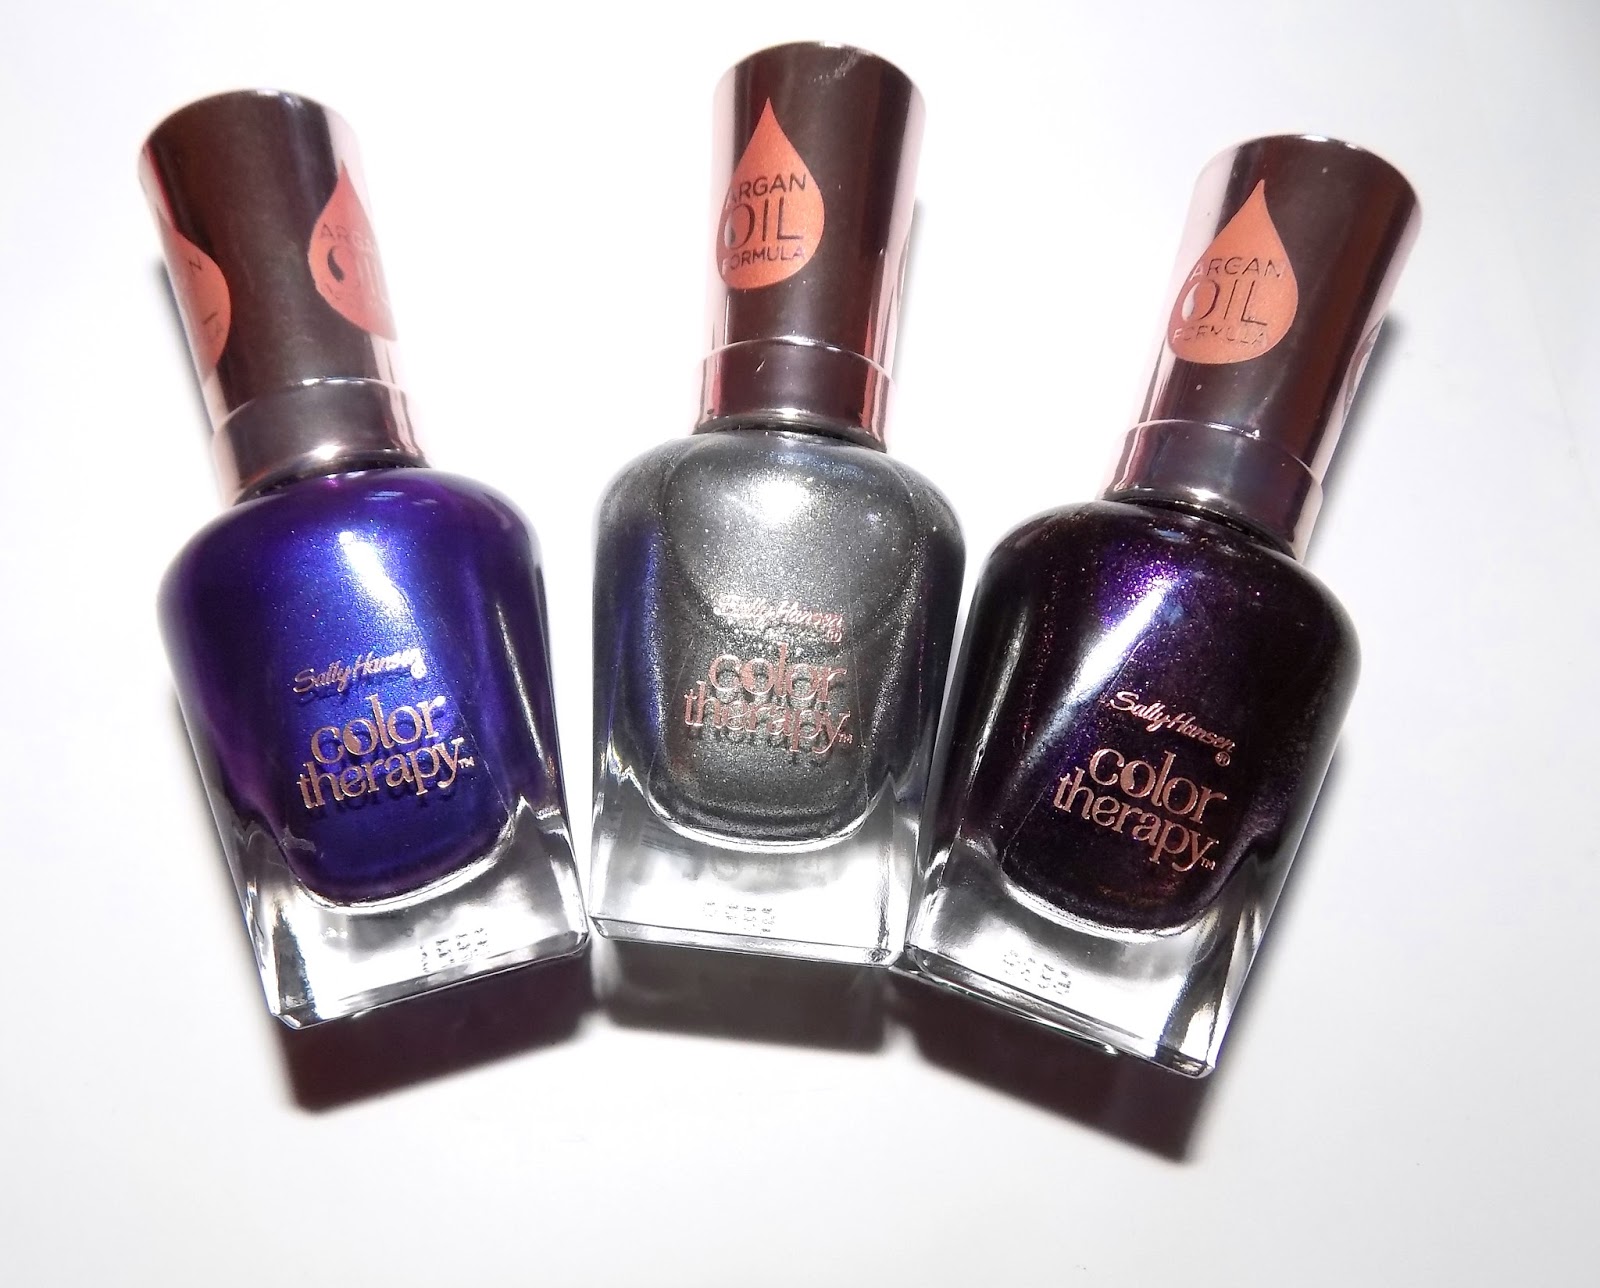 5. $3 off Sally Hansen Color Therapy Nail Polish with this coupon - wide 1